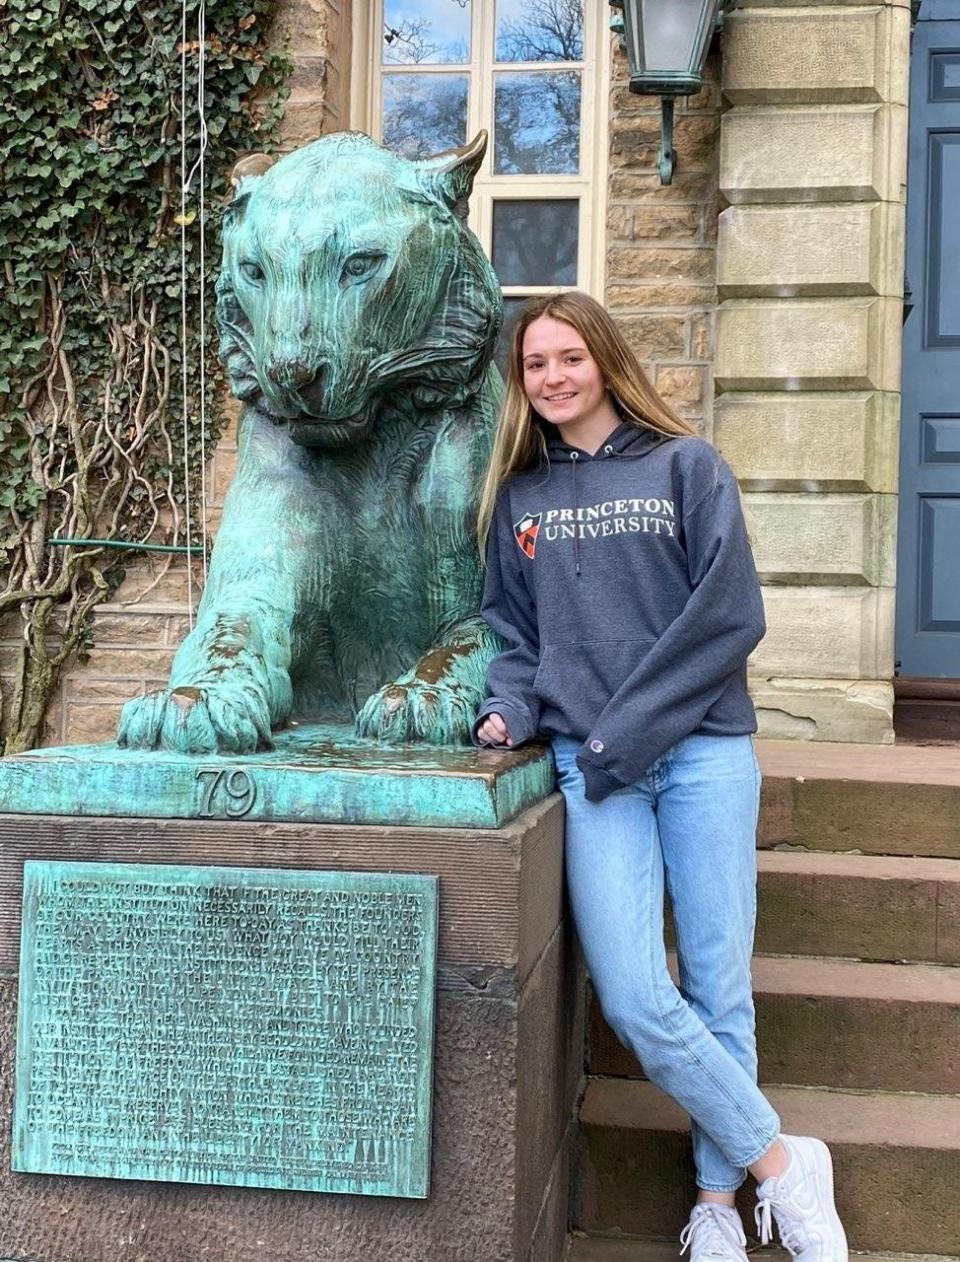 Shea Burke stands next to a tiger statue on Princeton University's campus